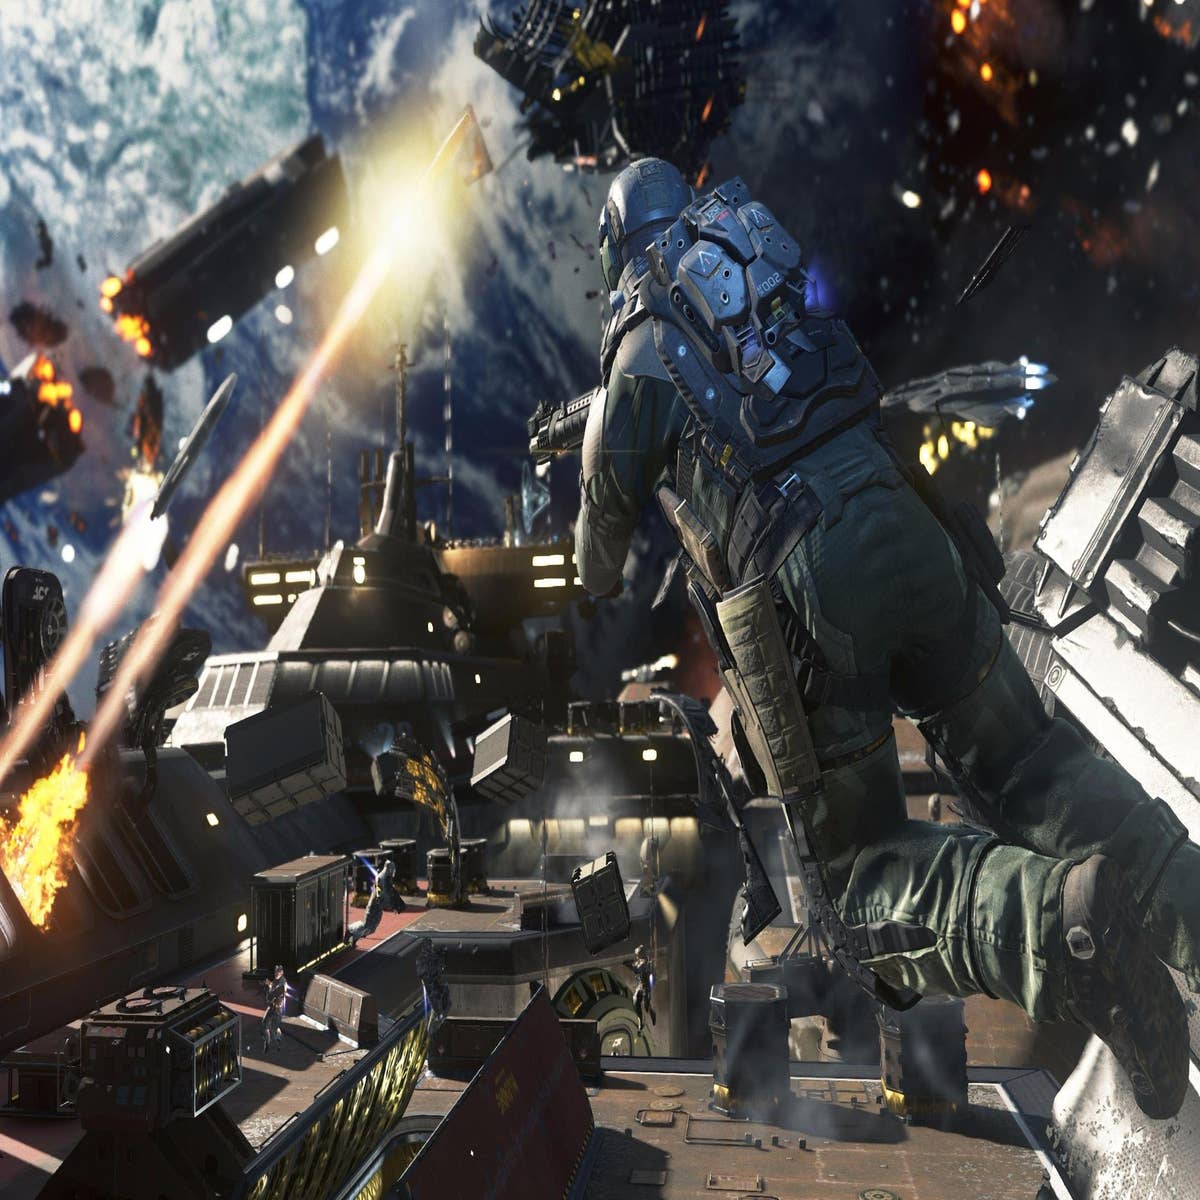 Call of Duty: Advanced Warfare' review: let's talk about shooting